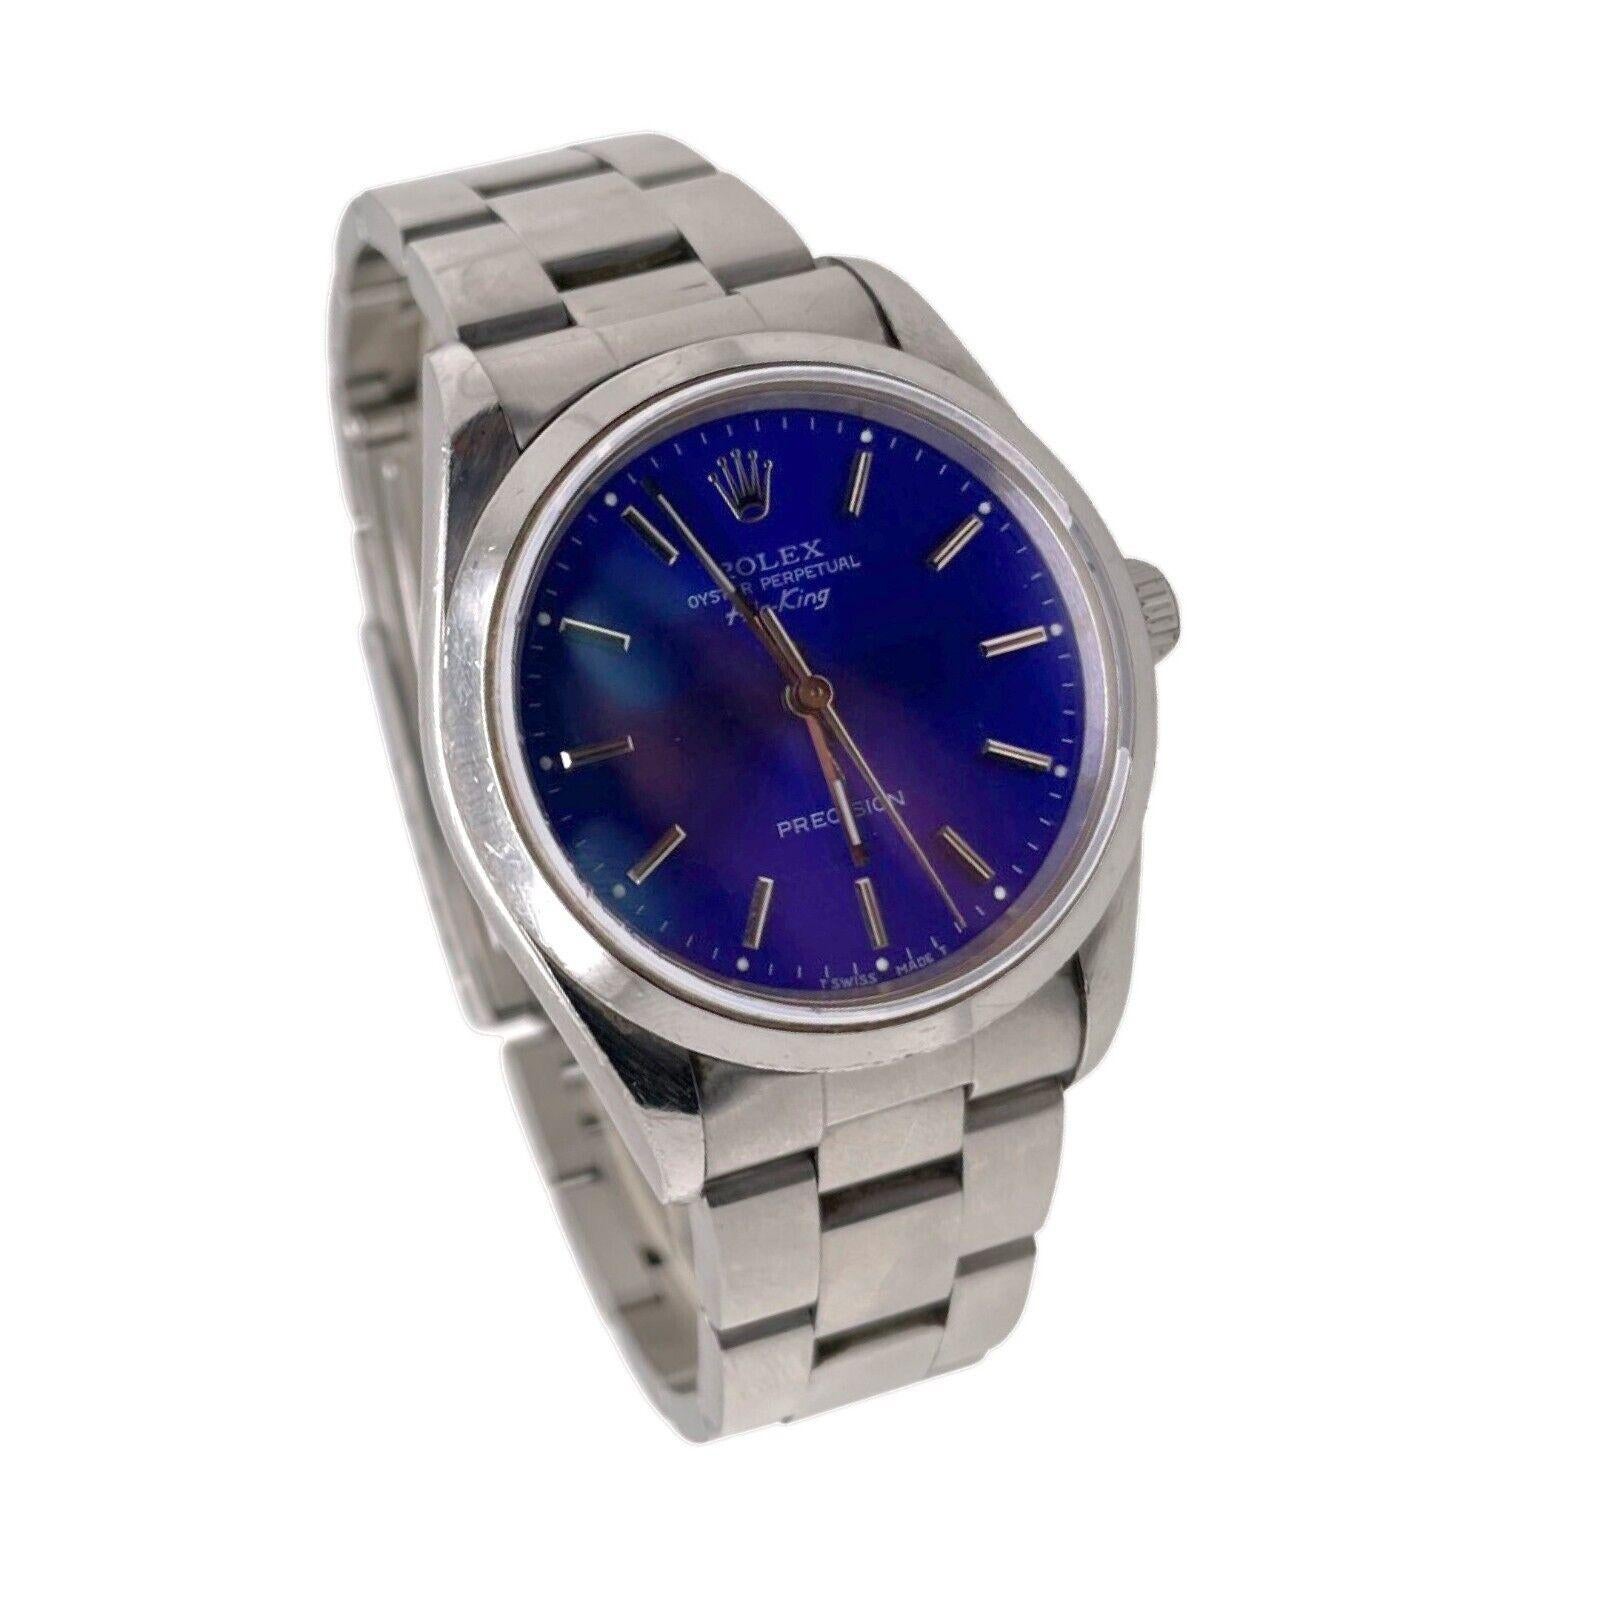 Brand: Rolex 

Model Name: Air-King

Model Number: 14000

Model Year: 1997

Movement: Automatic 

Case Size: 34  mm

Case Material: Stainless Steel 

Total Item Weight(grams): xx g

Dial: Blue

Bracelet: Oyster

Hour Markers: Luminous Stick Hour